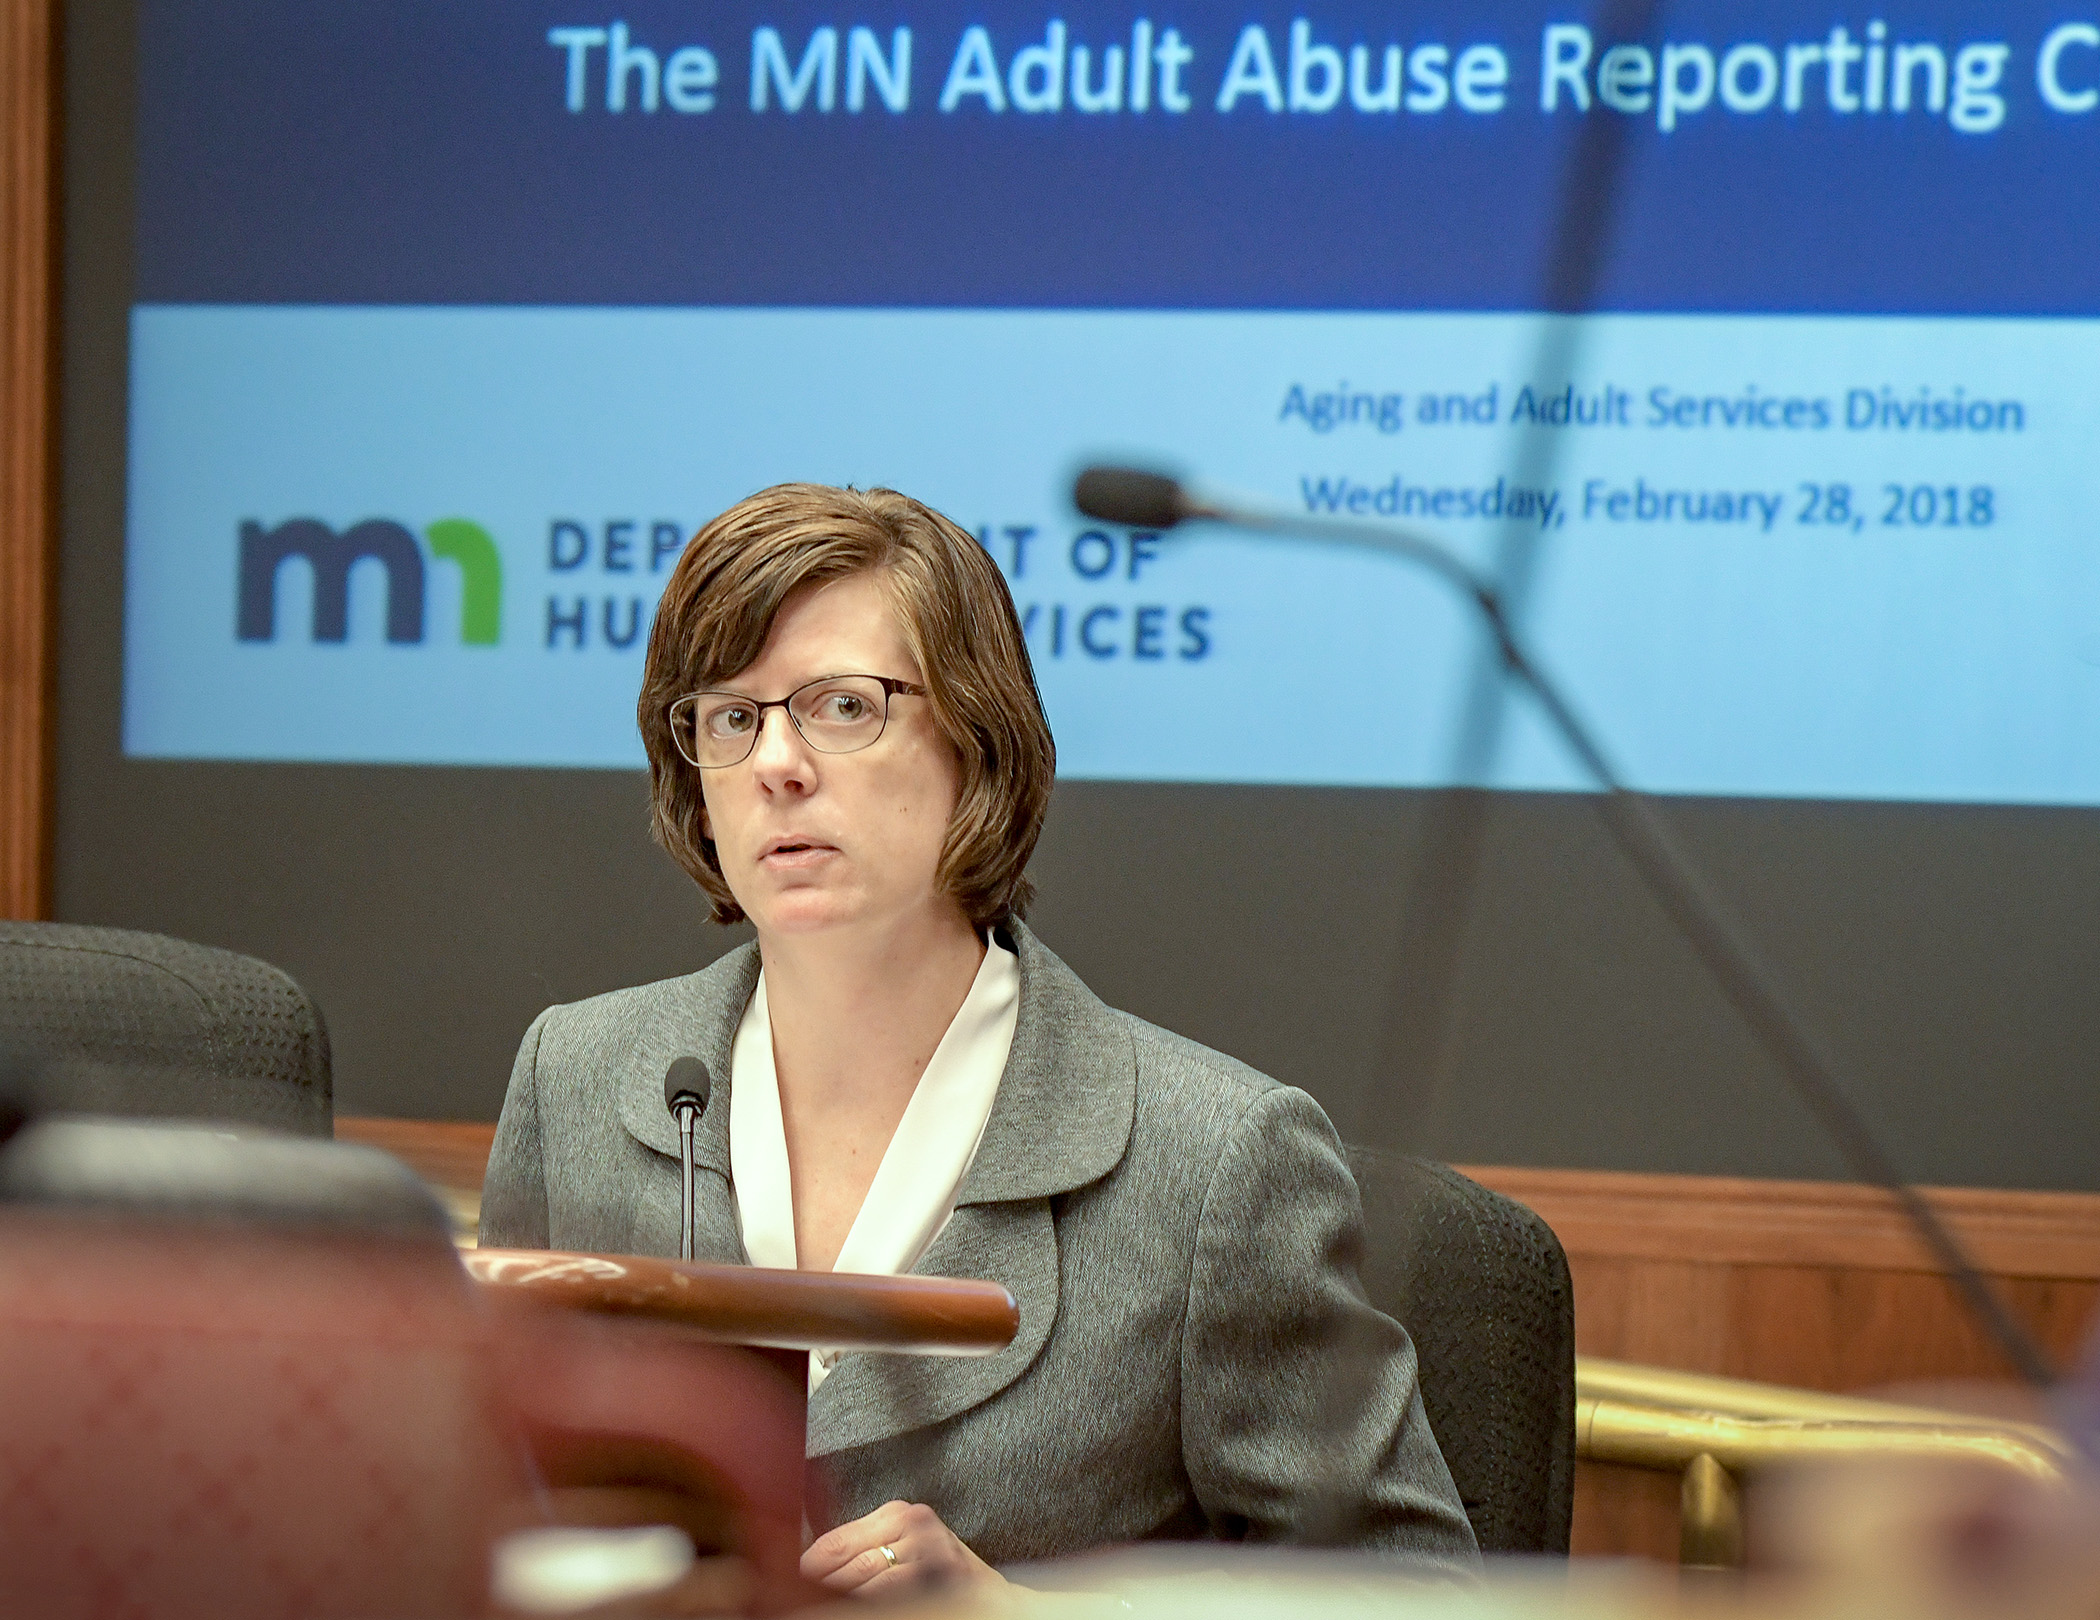 Kari Benson, director of aging and adult services for the Department of Human Services, presents an overview of the Minnesota Adult Abuse Reporting Center to the House Subcommittee on Aging and Long-Term Care Feb. 28. Photo by Andrew VonBank